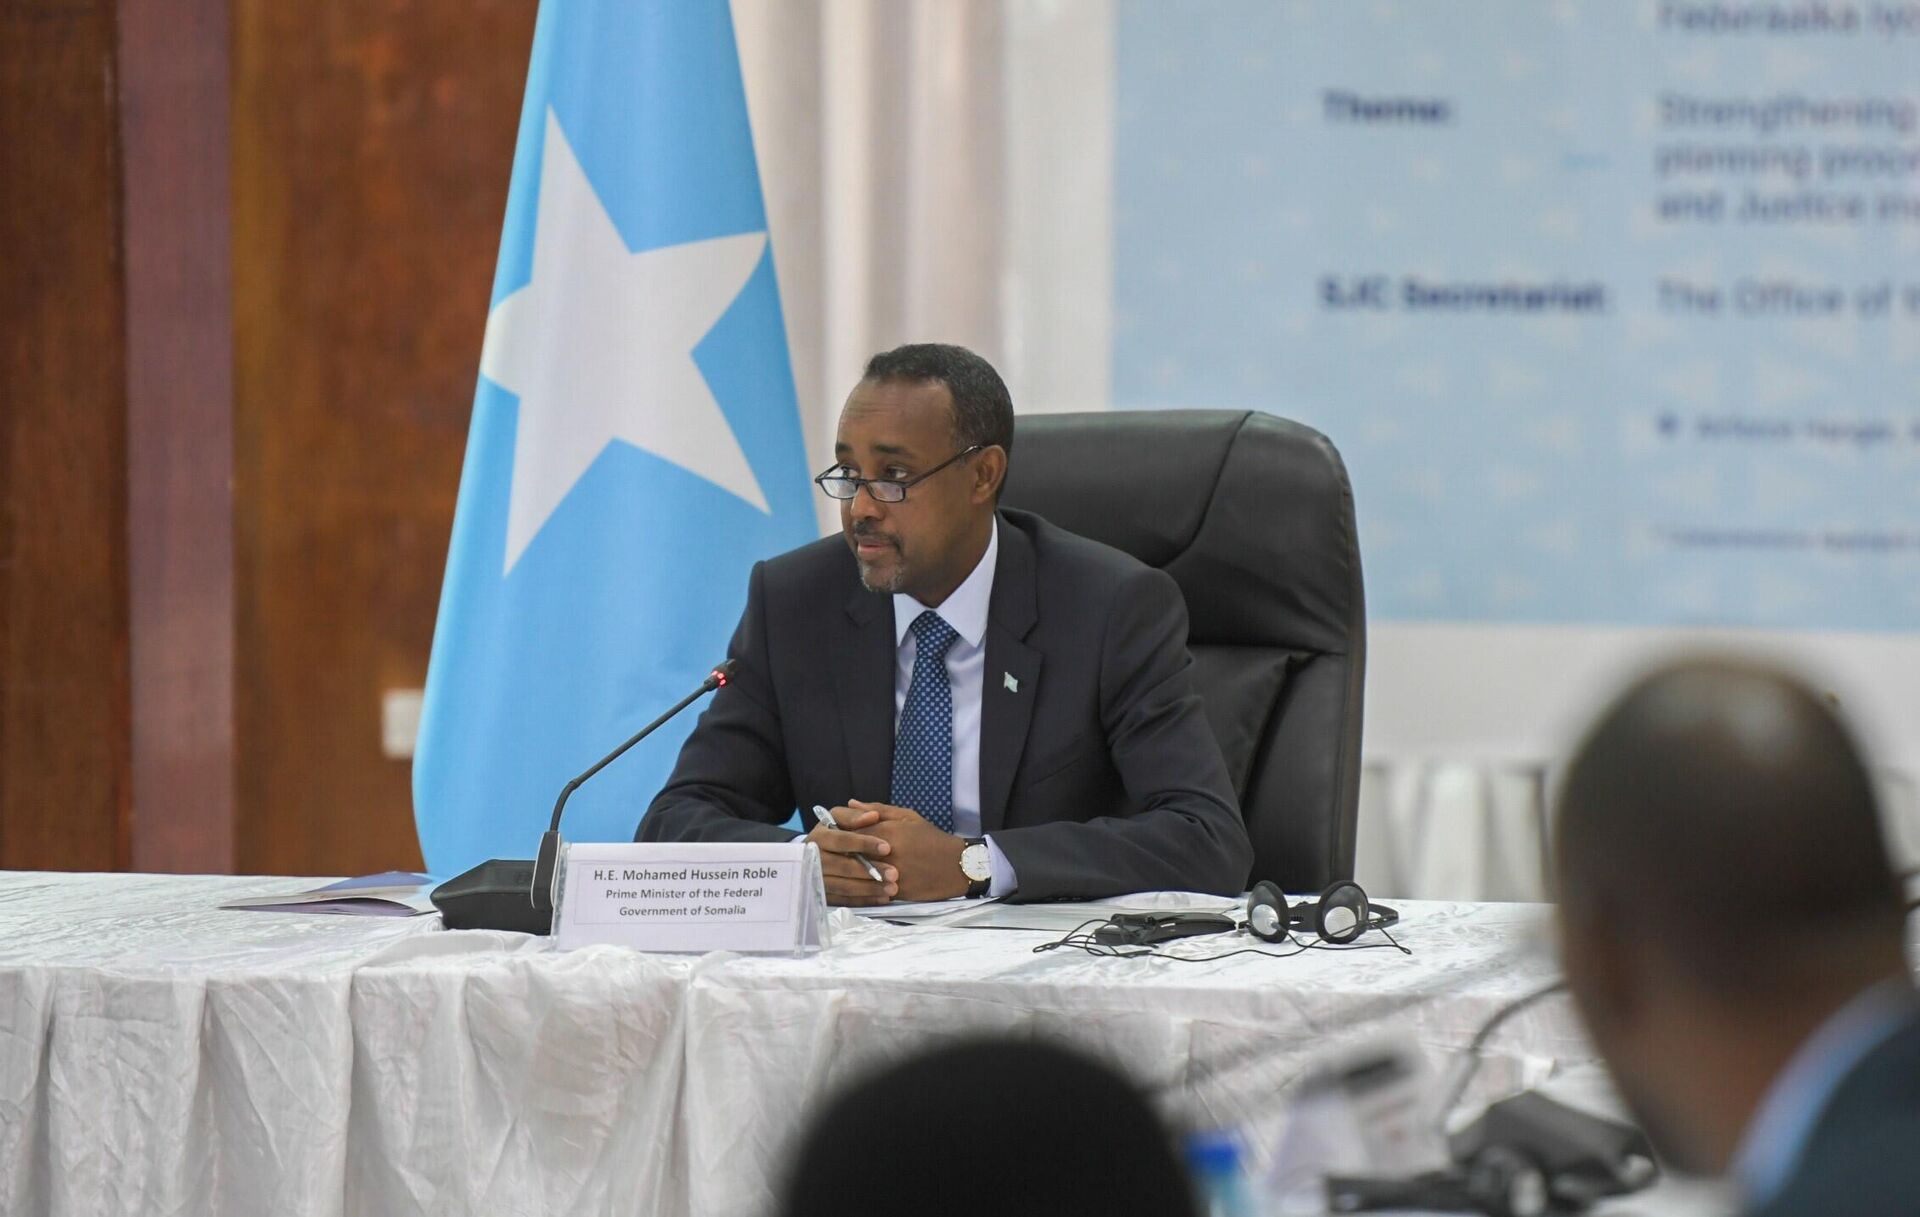 The Prime Minister of Somalia, Mohamed Hussein Roble, chairs a Security and Justice Committee meeting, involving top officials from the Federal Government of Somalia, Federal Member States and international partners, in Mogadishu, Somalia, on 1 December 2020. - Sputnik International, 1920, 28.12.2021